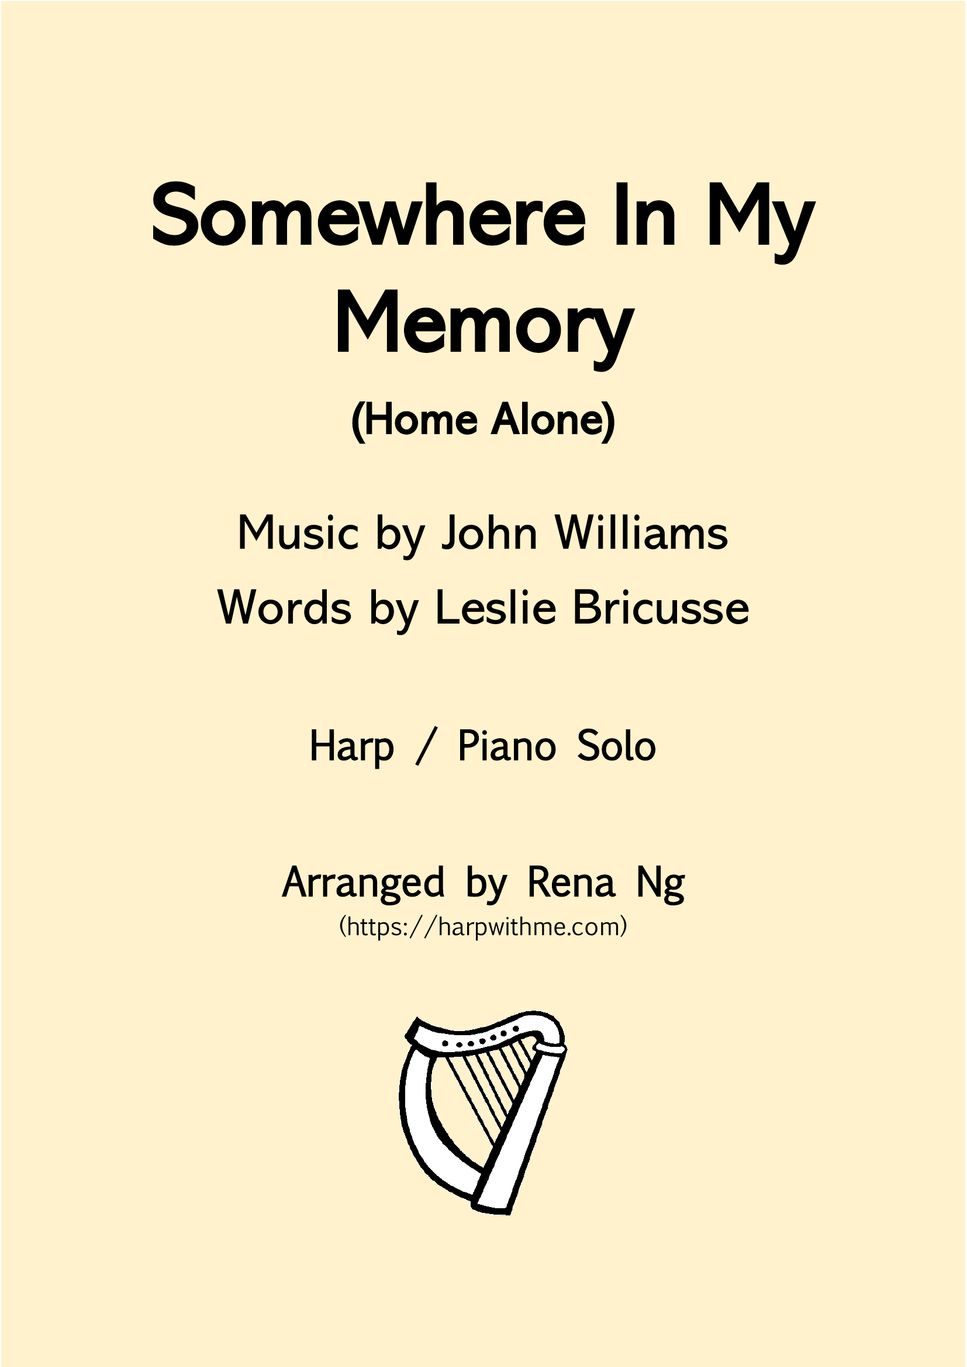 Home Alone - Somewhere In My Memory (Harp / Piano Solo) - Intermediate by Harp With Me